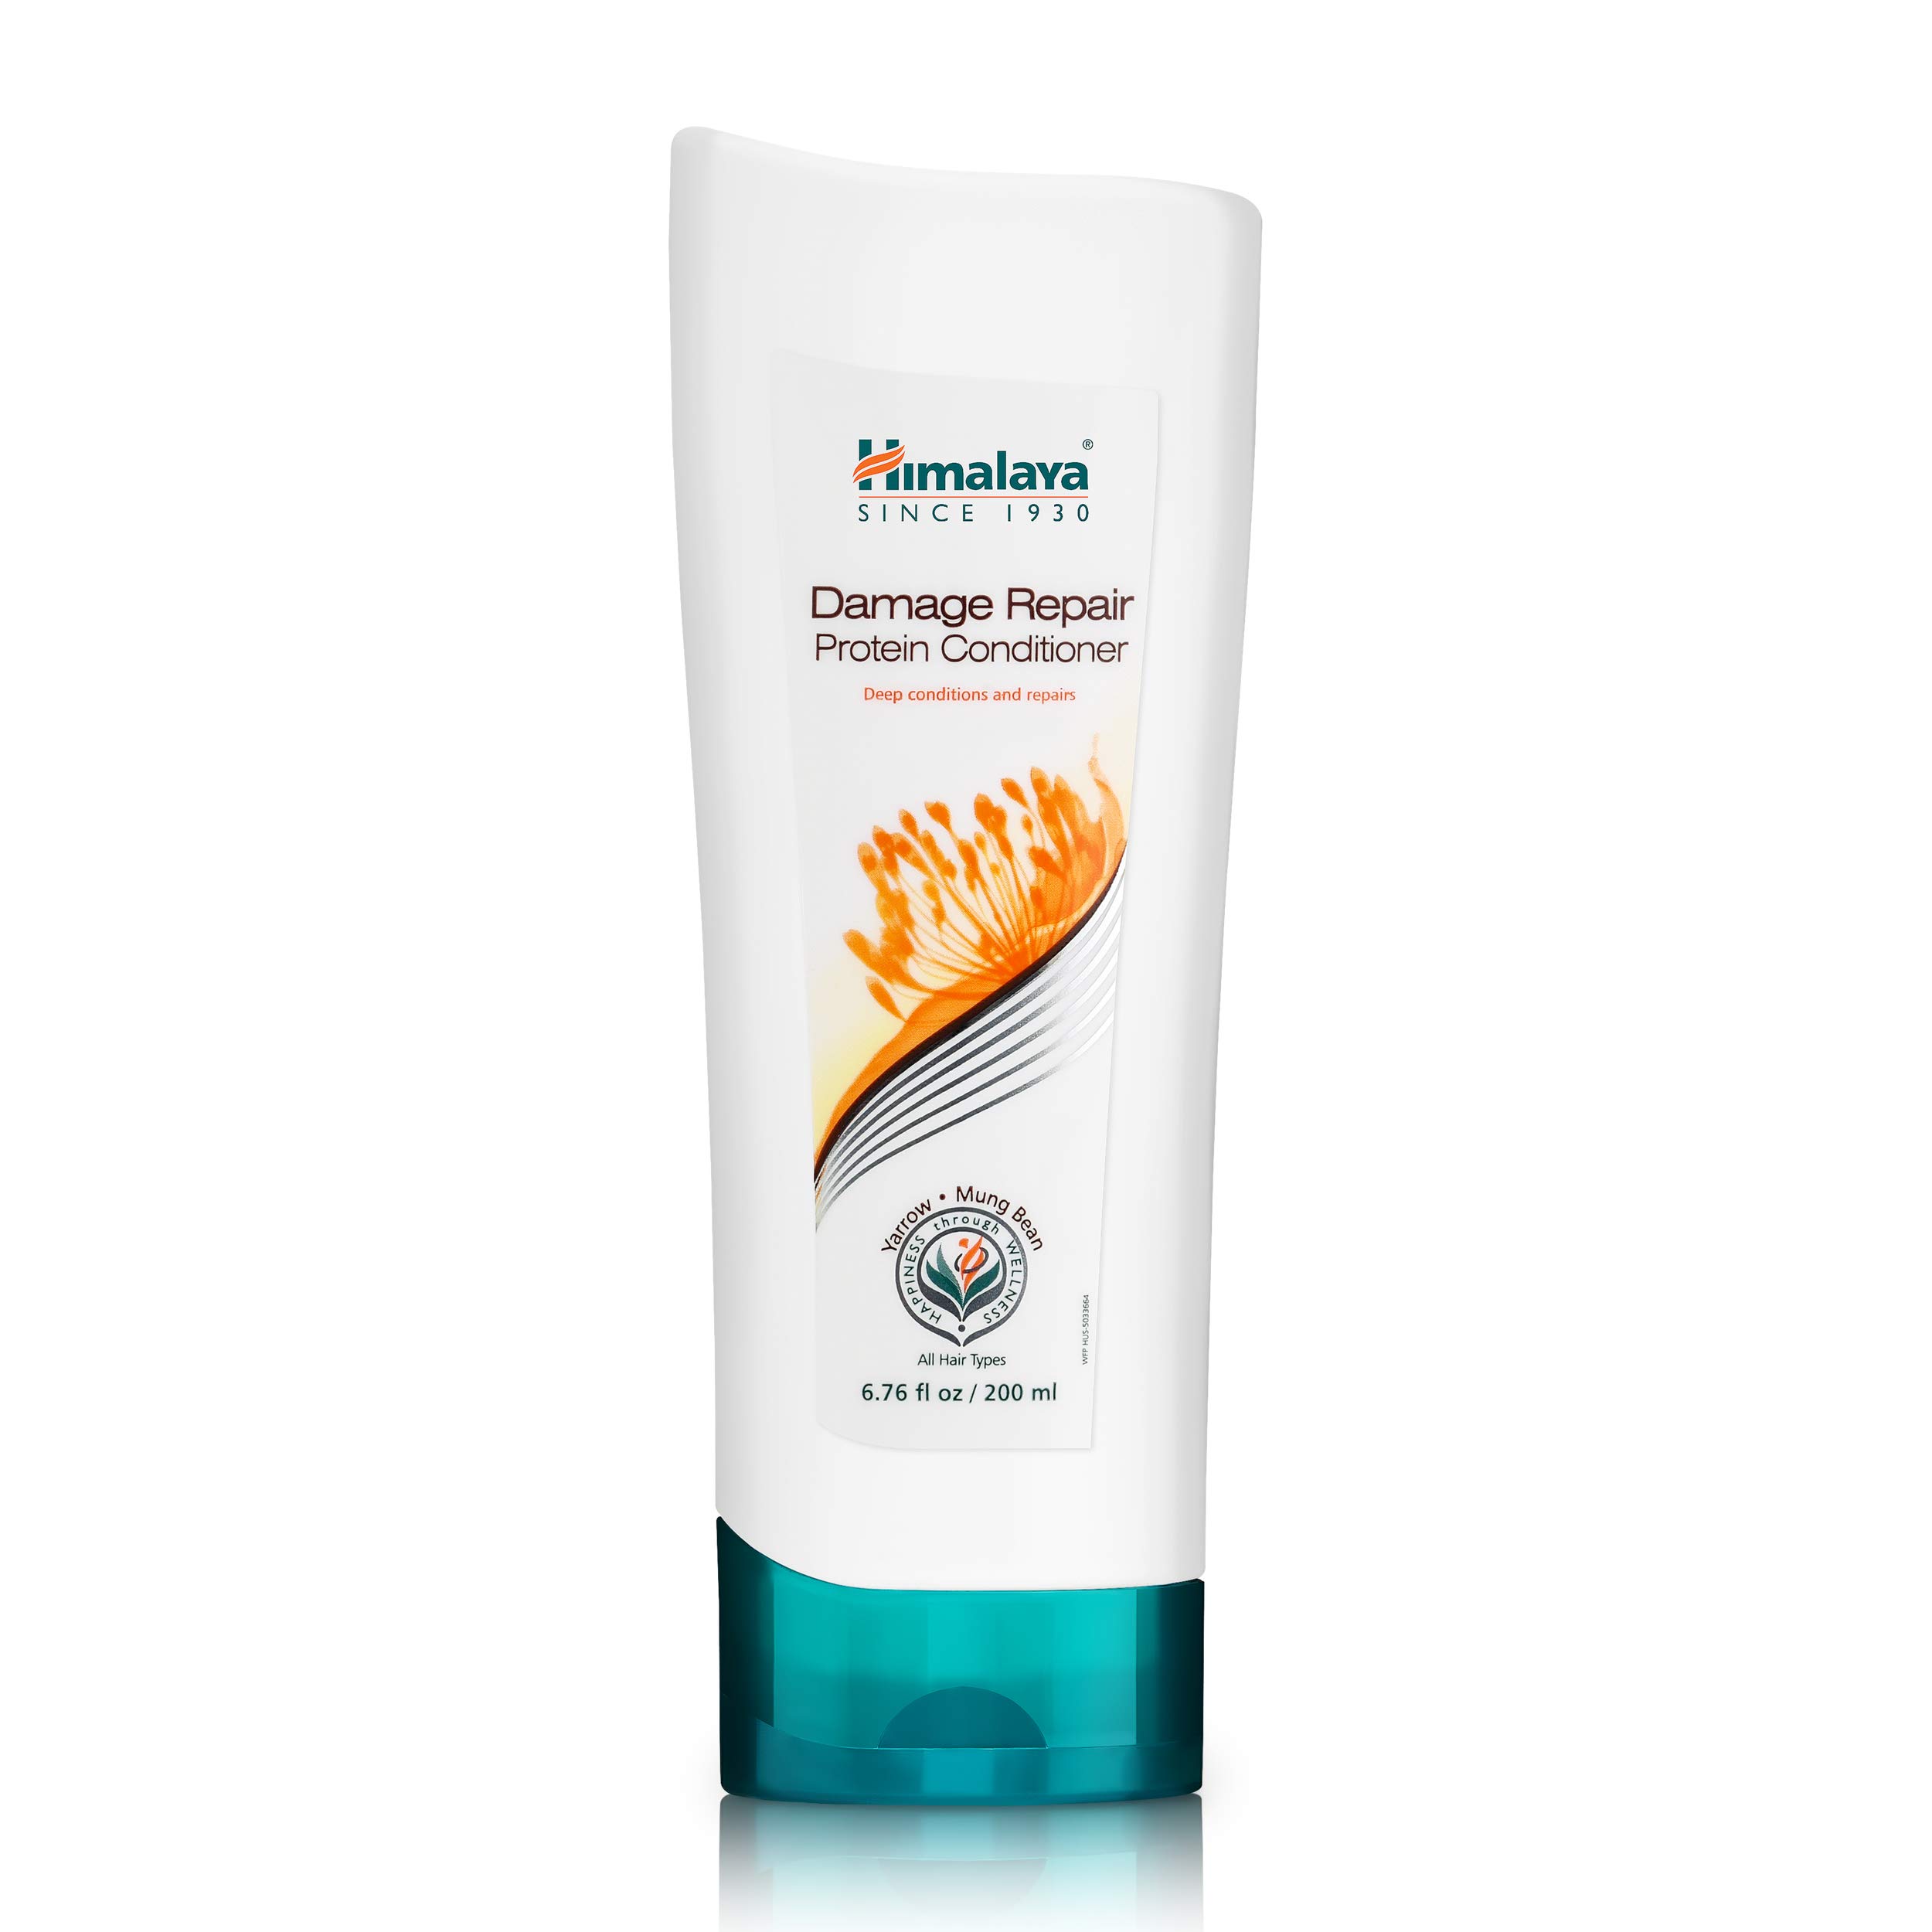 Himalaya Damage Repair Protein Conditioner, 6.76 Fluid Ounce